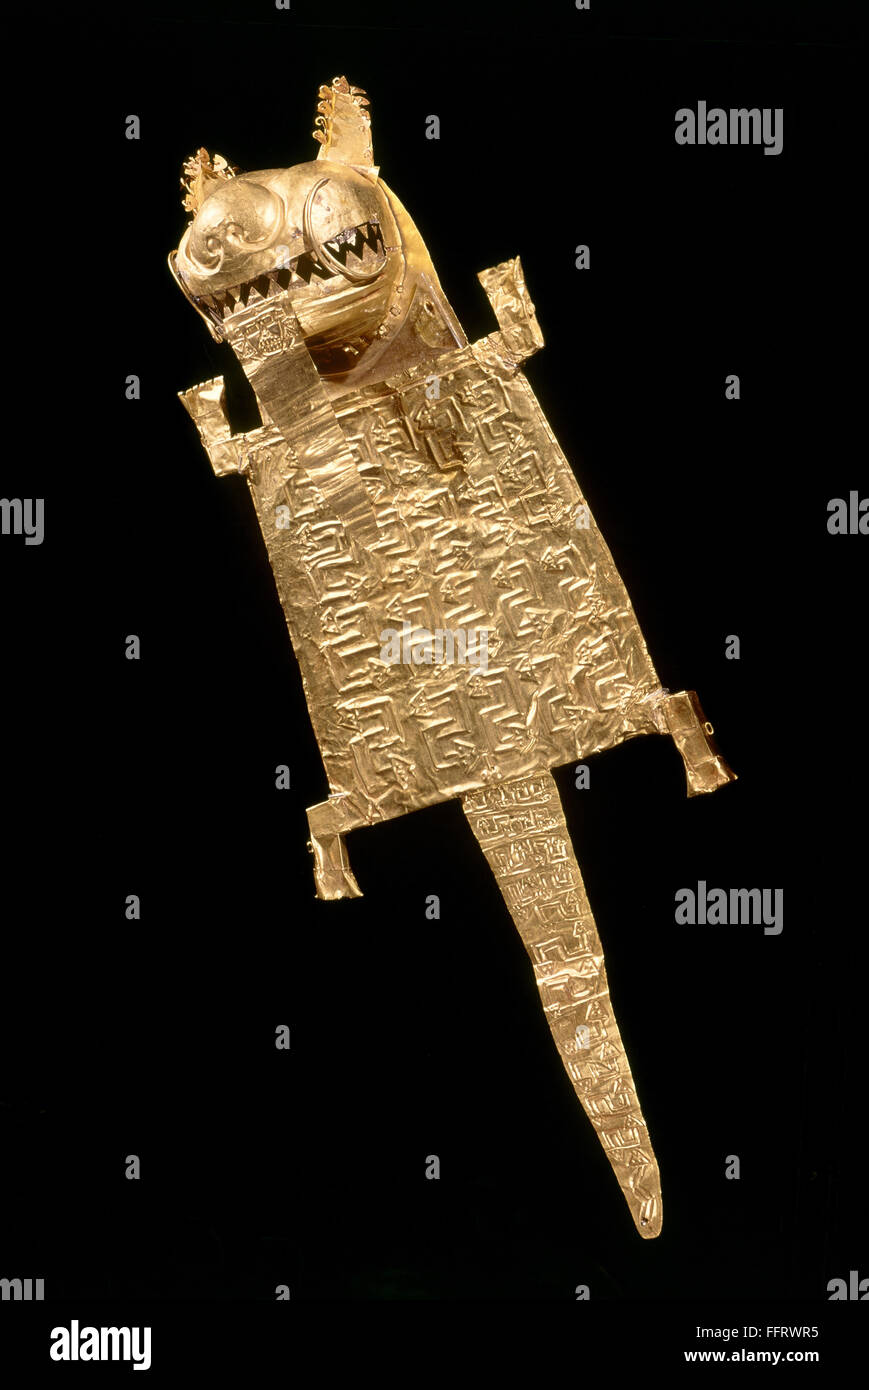 INCAN GOLD ORNAMENT. /nIncan ornament of embossed gold in the shape of a jaguar. Stock Photo